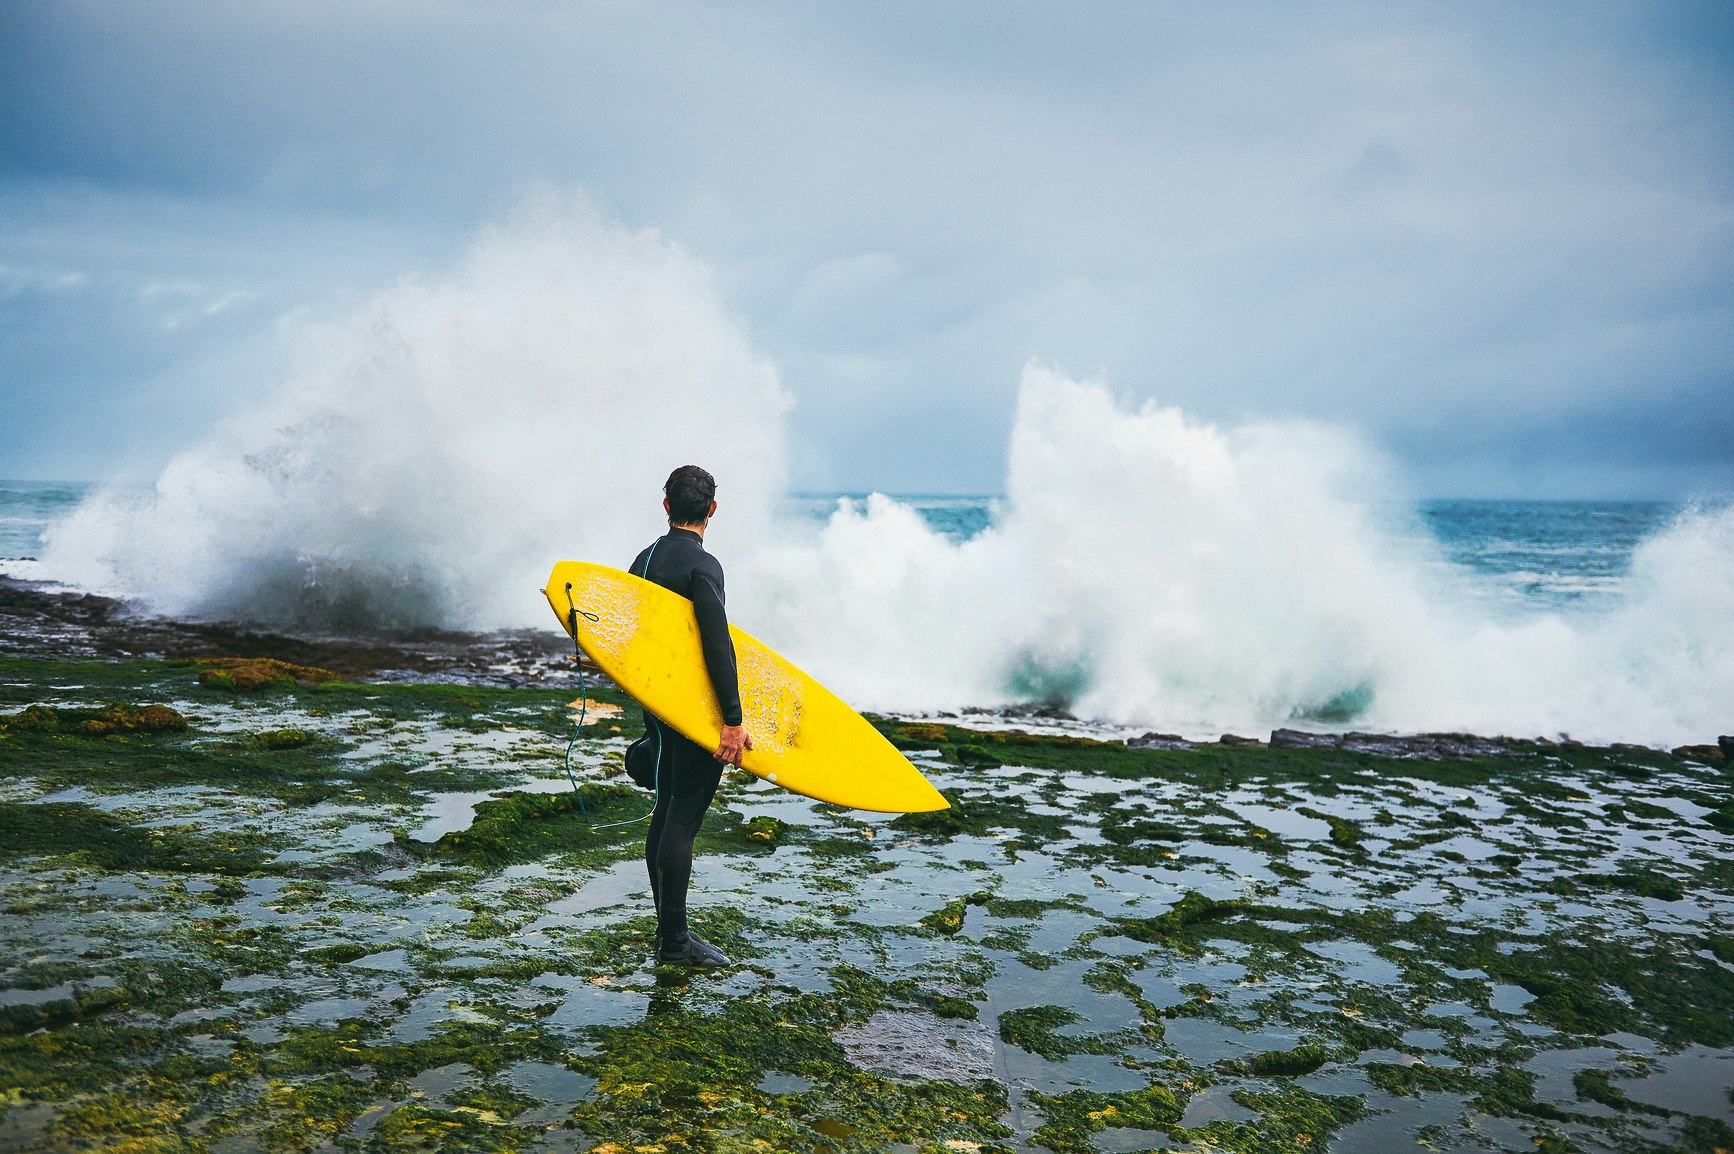 Surfer in a full wet suit holding a yellow surfboard looking out towards huge Atlantic waves hitting the coast of Ireland